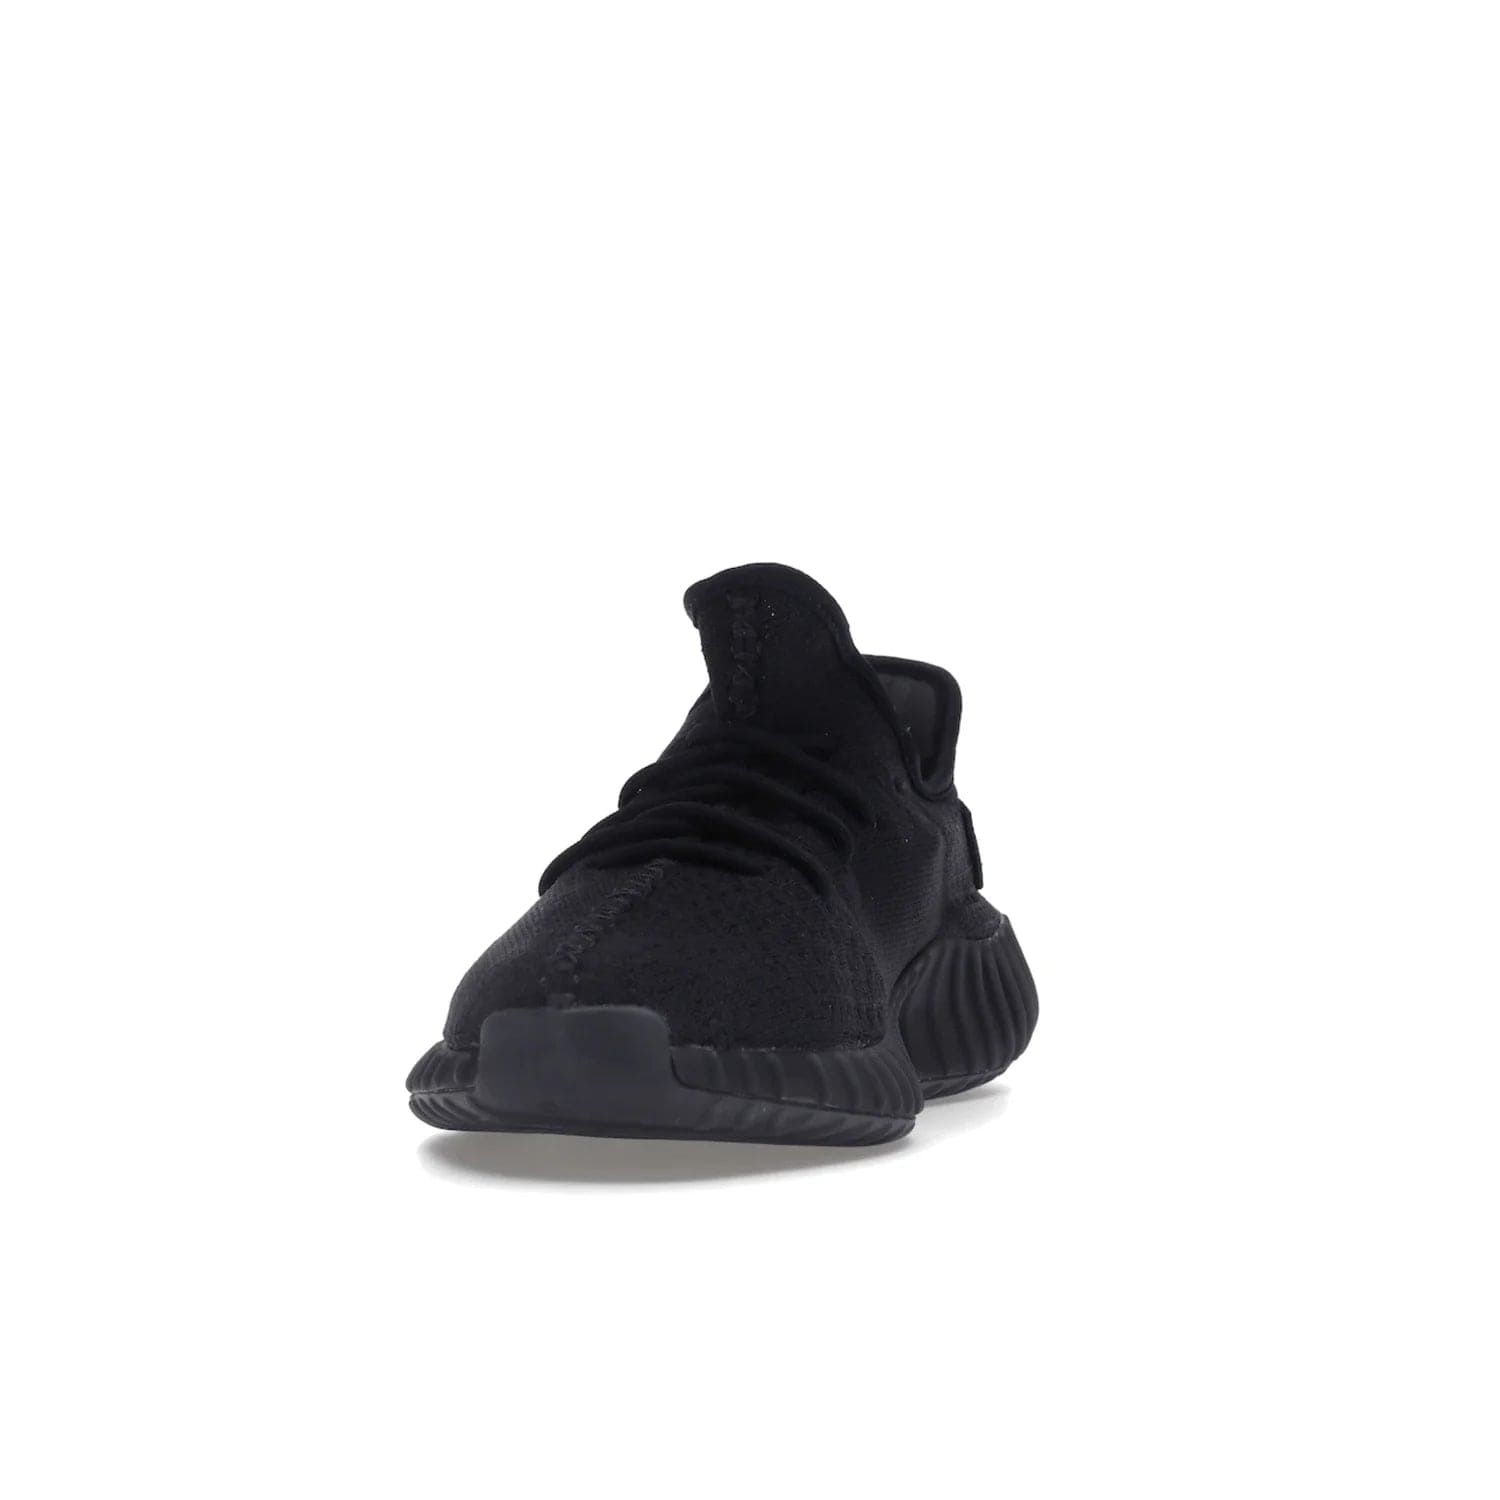 adidas Yeezy Boost 350 V2 Onyx - Image 12 - Only at www.BallersClubKickz.com - Adidas Yeezy Boost 350 V2 Onyx Triple Black shoes for comfort and style. Arriving Spring 2022.